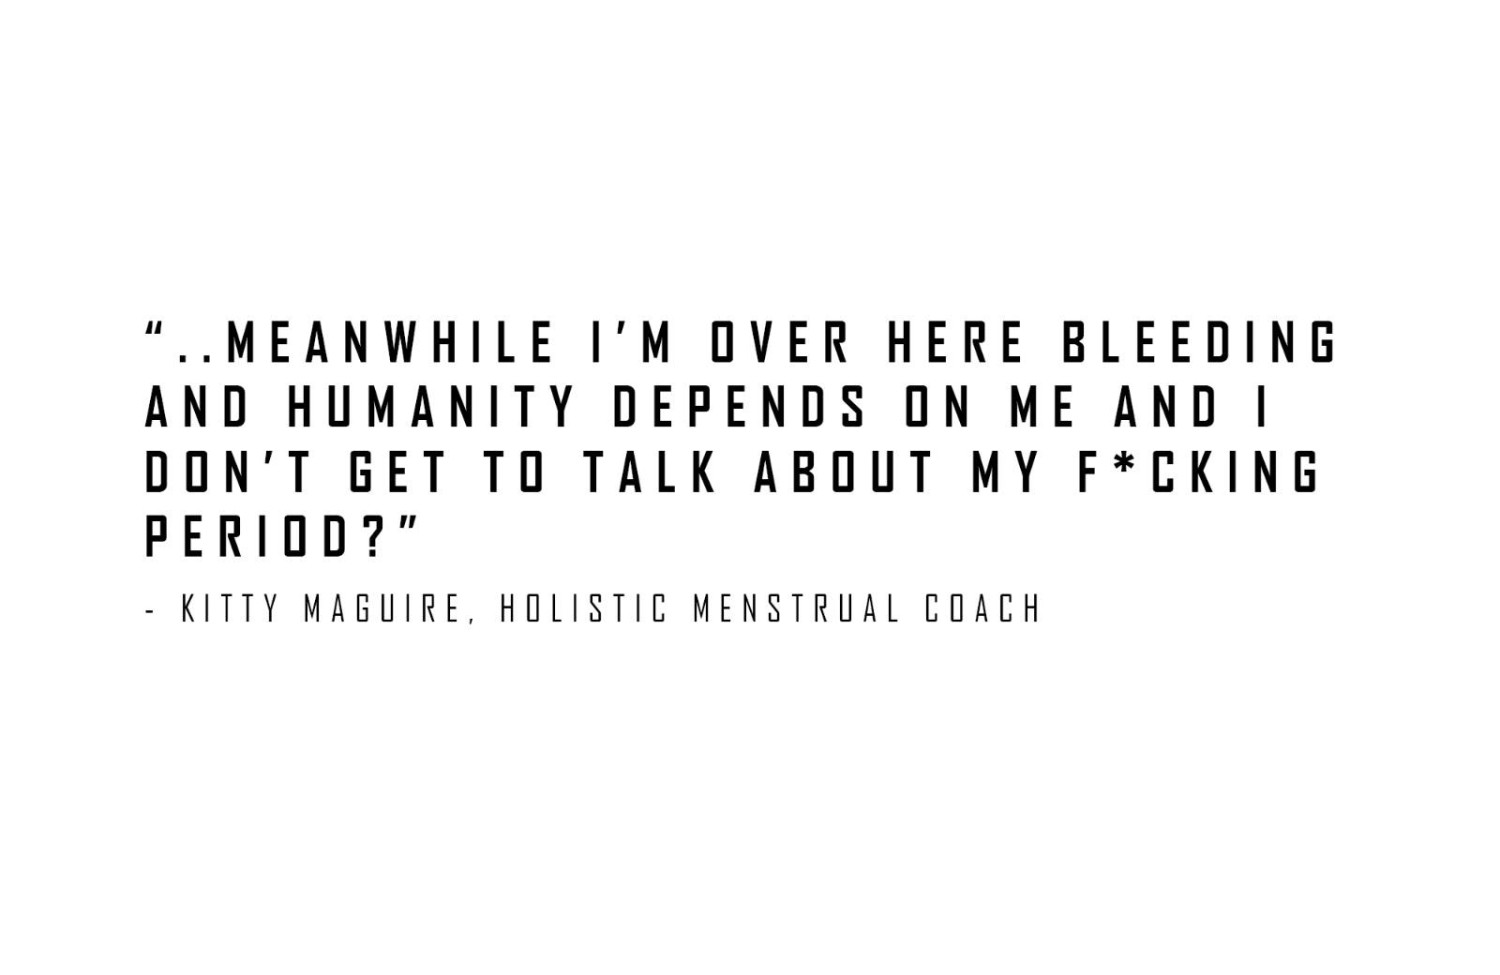 Interview with holistic menstrual coach, Kitty Maguire